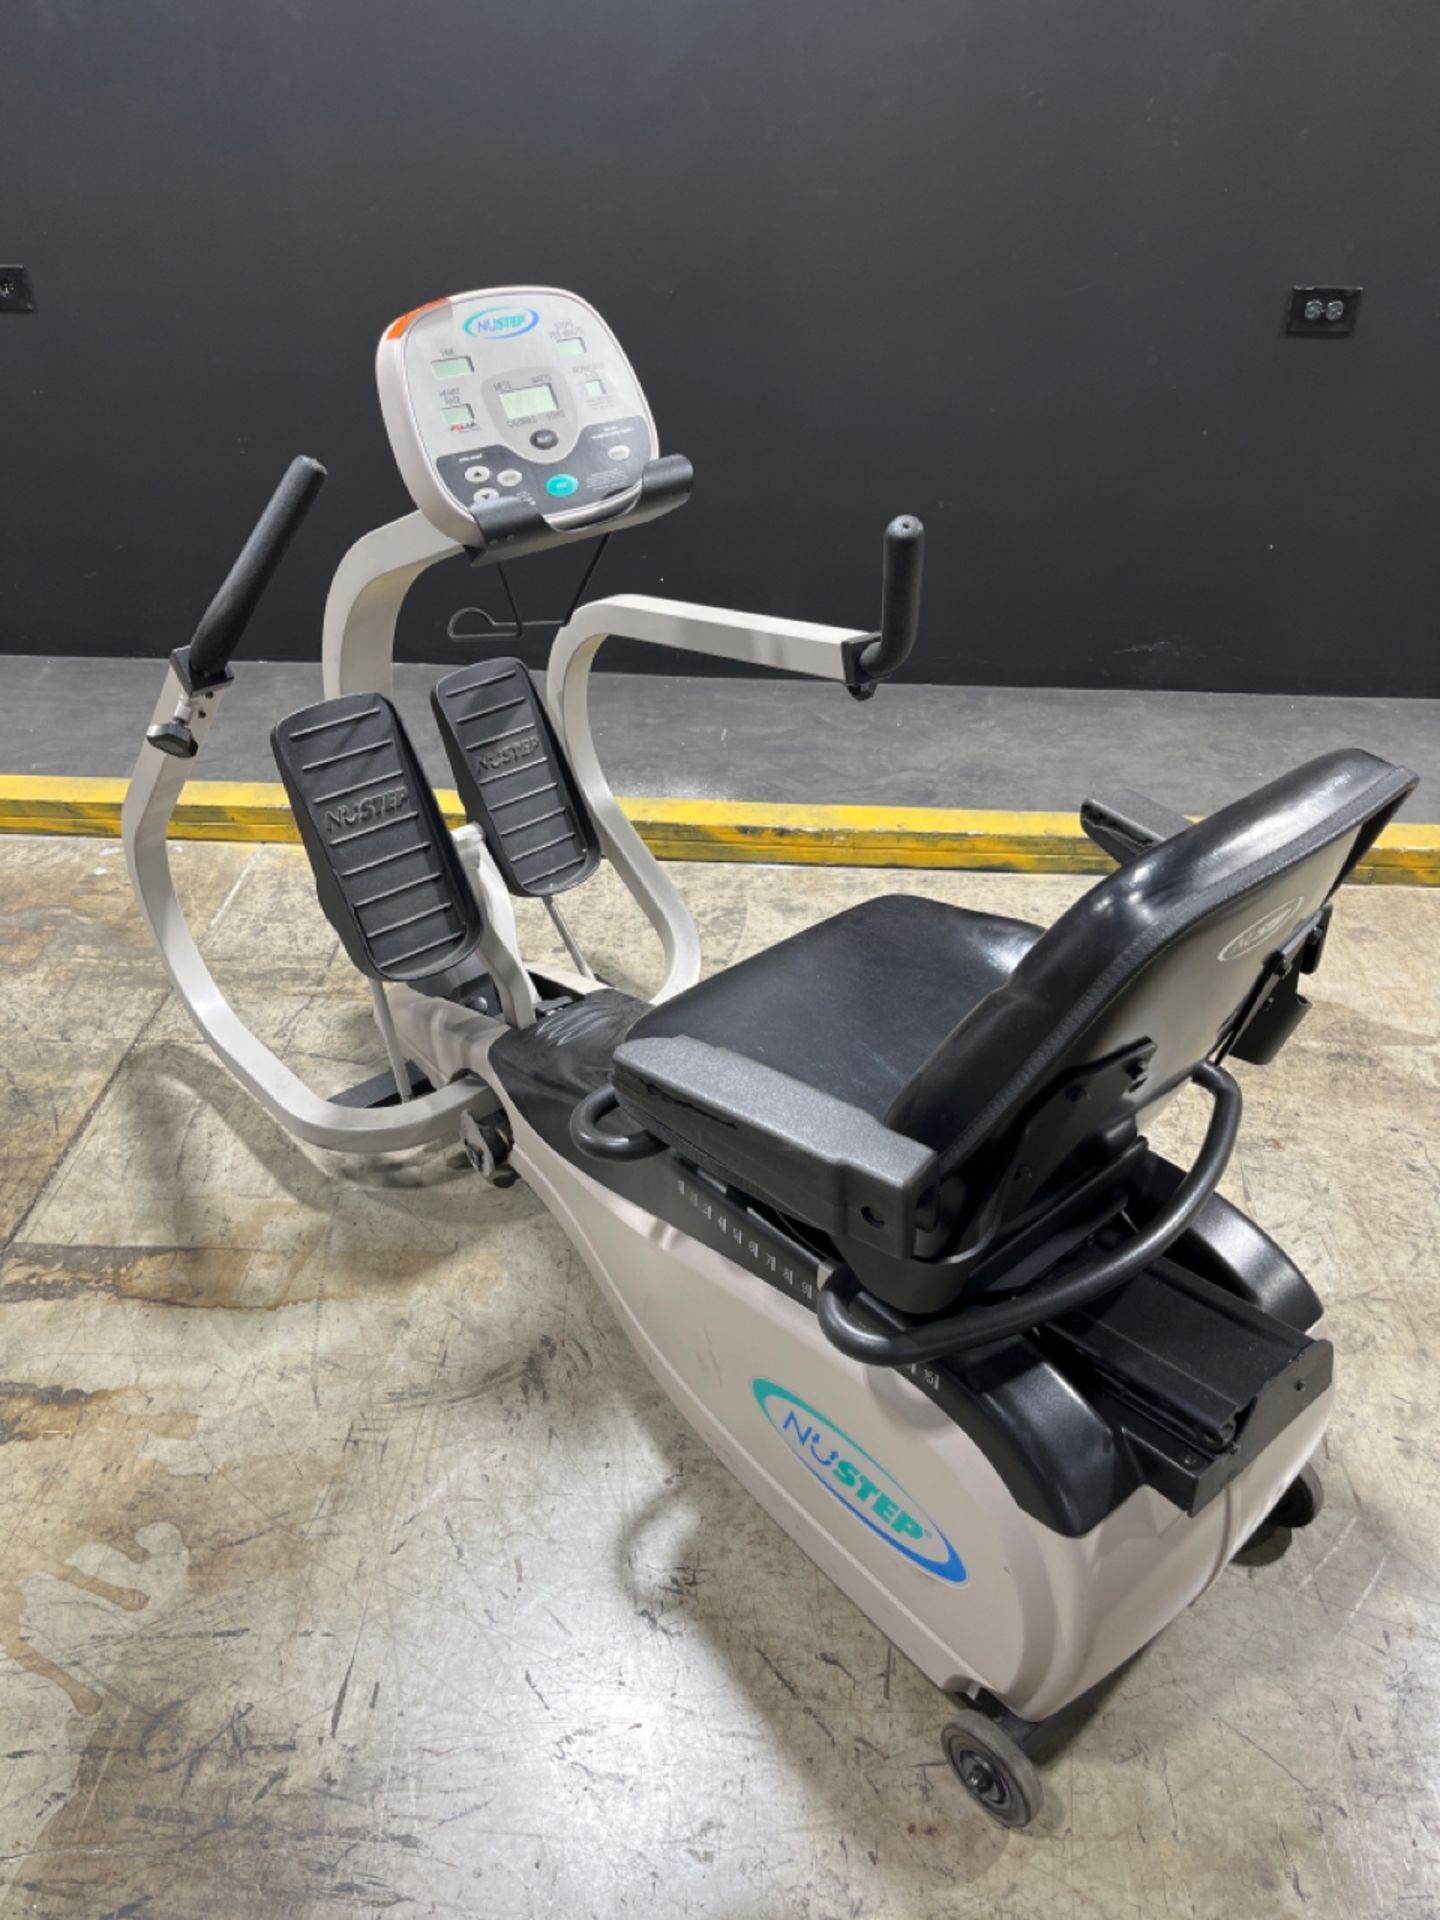 NUSTEP TRS 4000 RECUMBENT STEPPER (LOCATED AT 3325 MOUNT PROSPECT ROAD, FRANKLIN PARK, IL, 60131) - Image 2 of 3